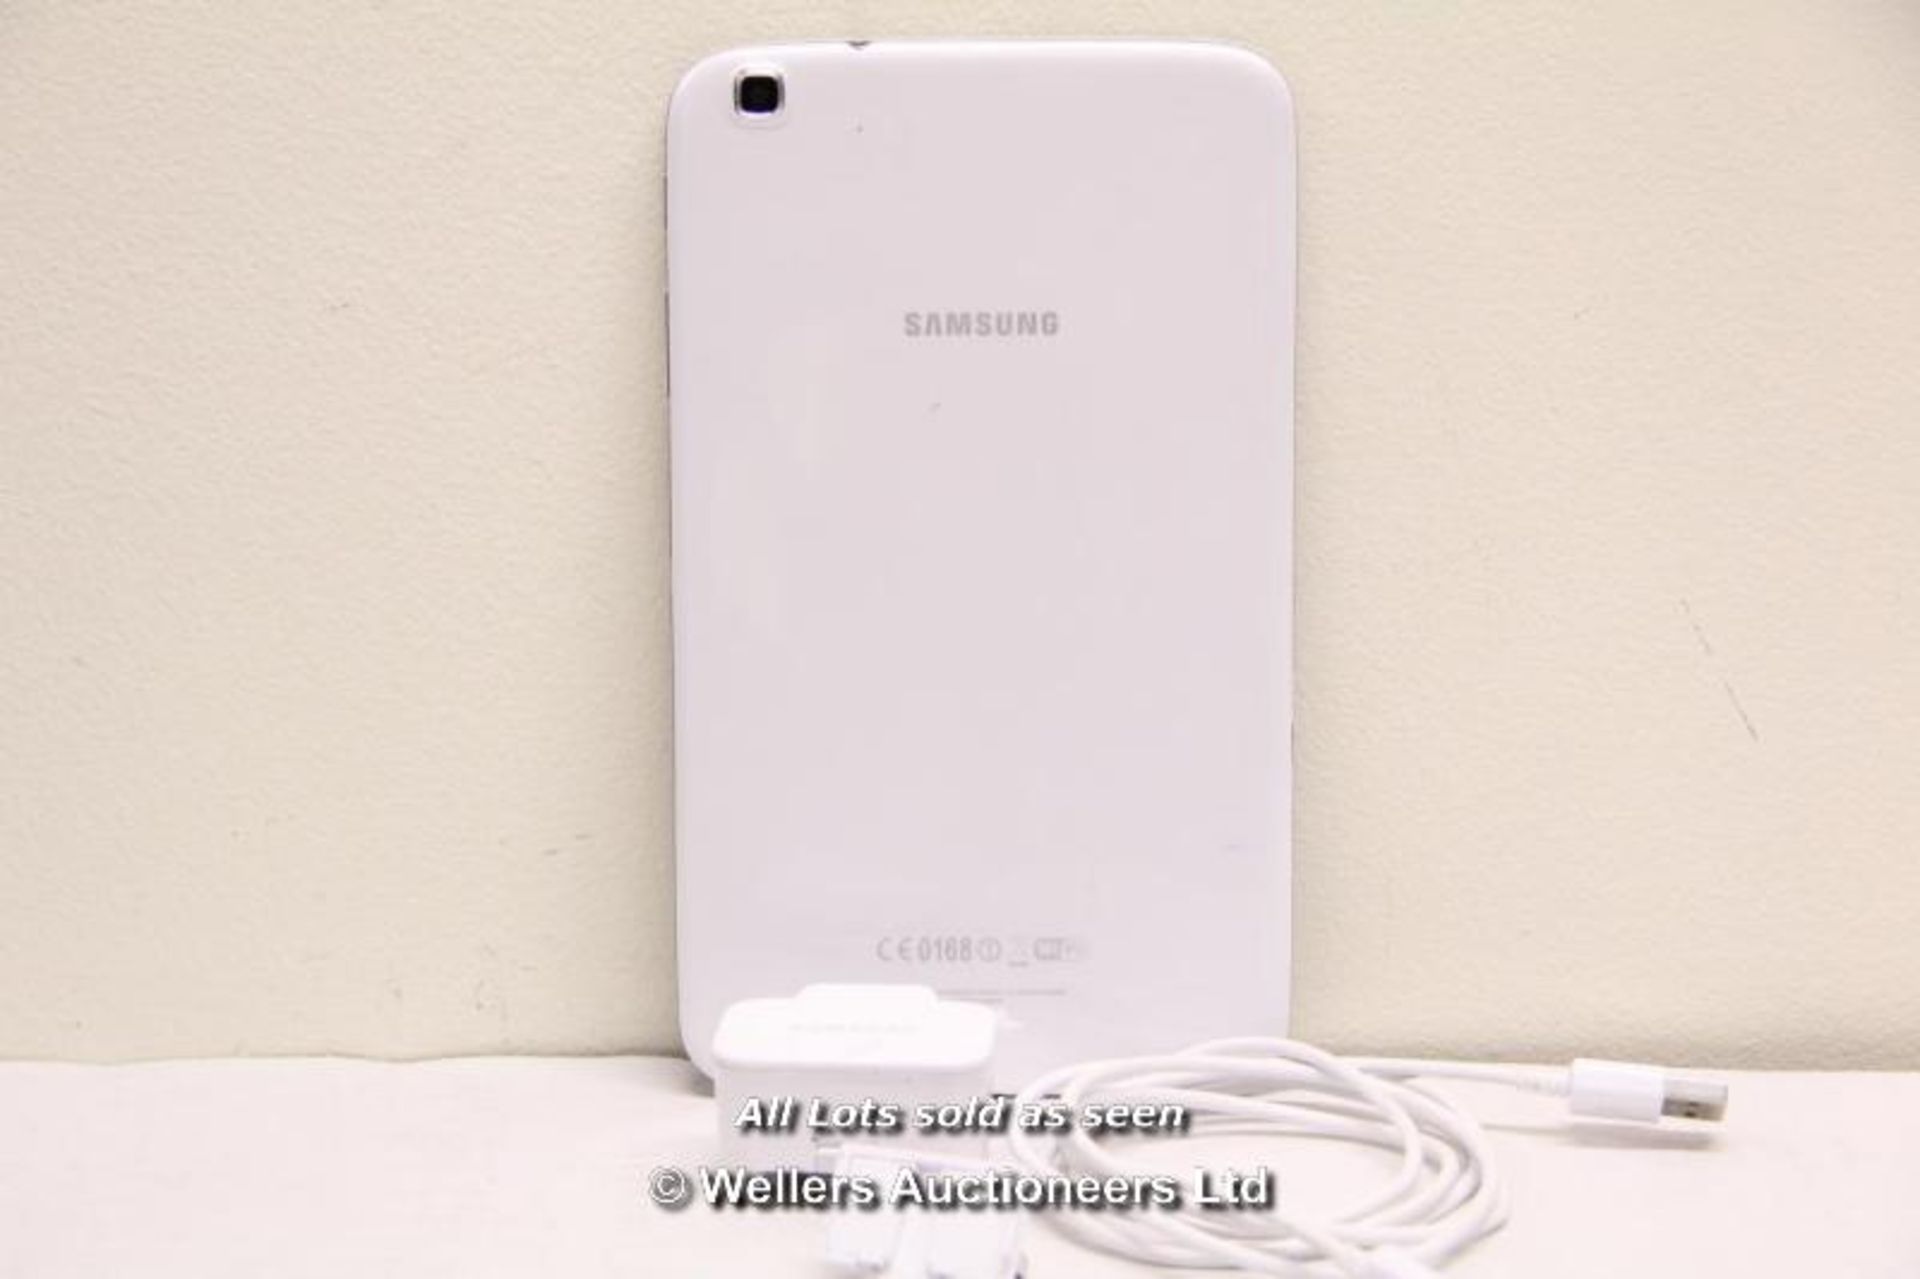 SAMSUNG GALAXY TAB 3 SM-T310 16GB WI-FI  8" - WHITE (36063947) / INCLUDING CHARGER AND USB CABLE / - Image 2 of 2